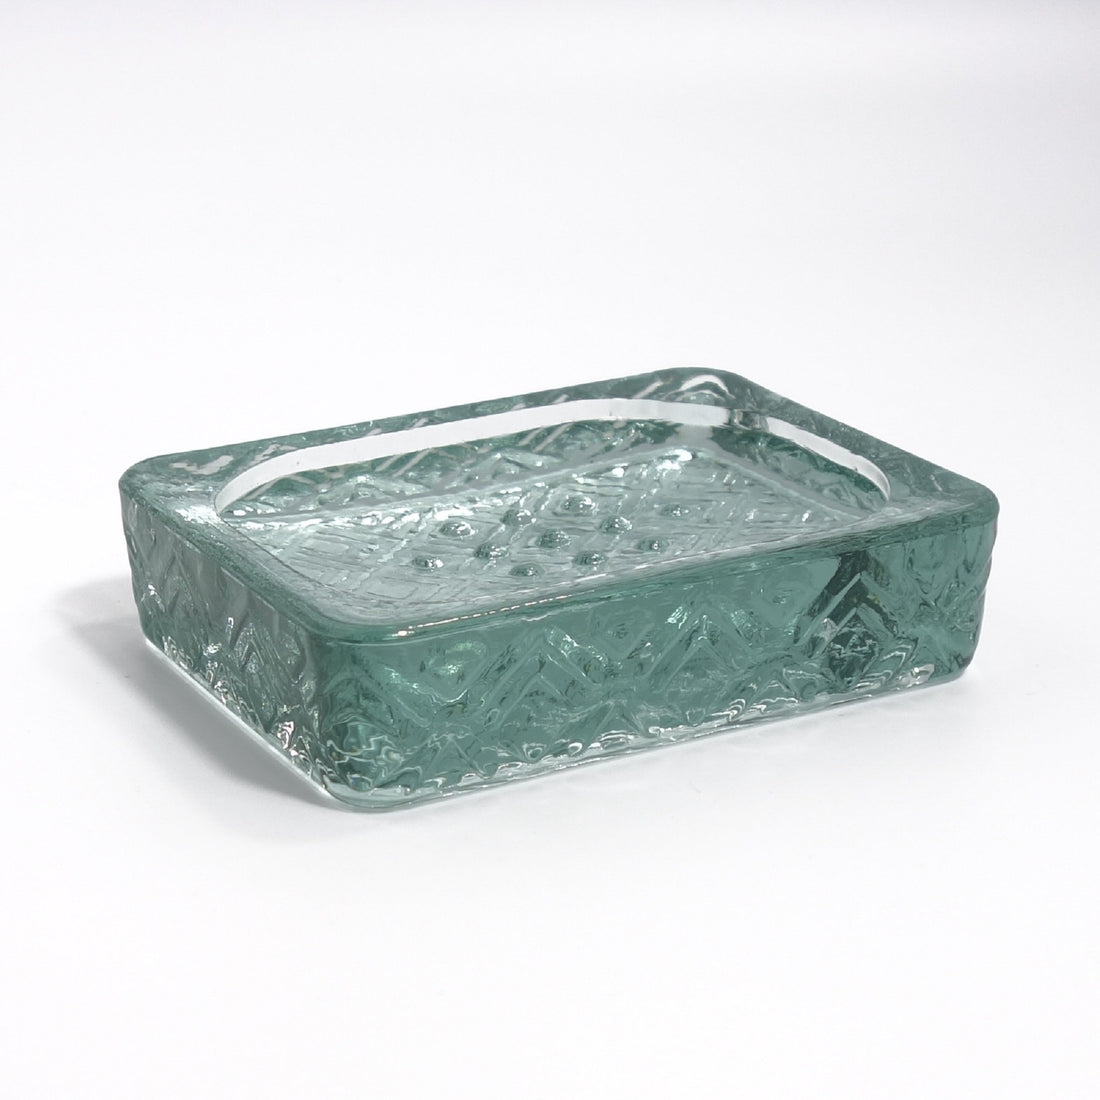 NIHON RECYCLED GLASS SOAP DISH | NATURAL RECYCLED